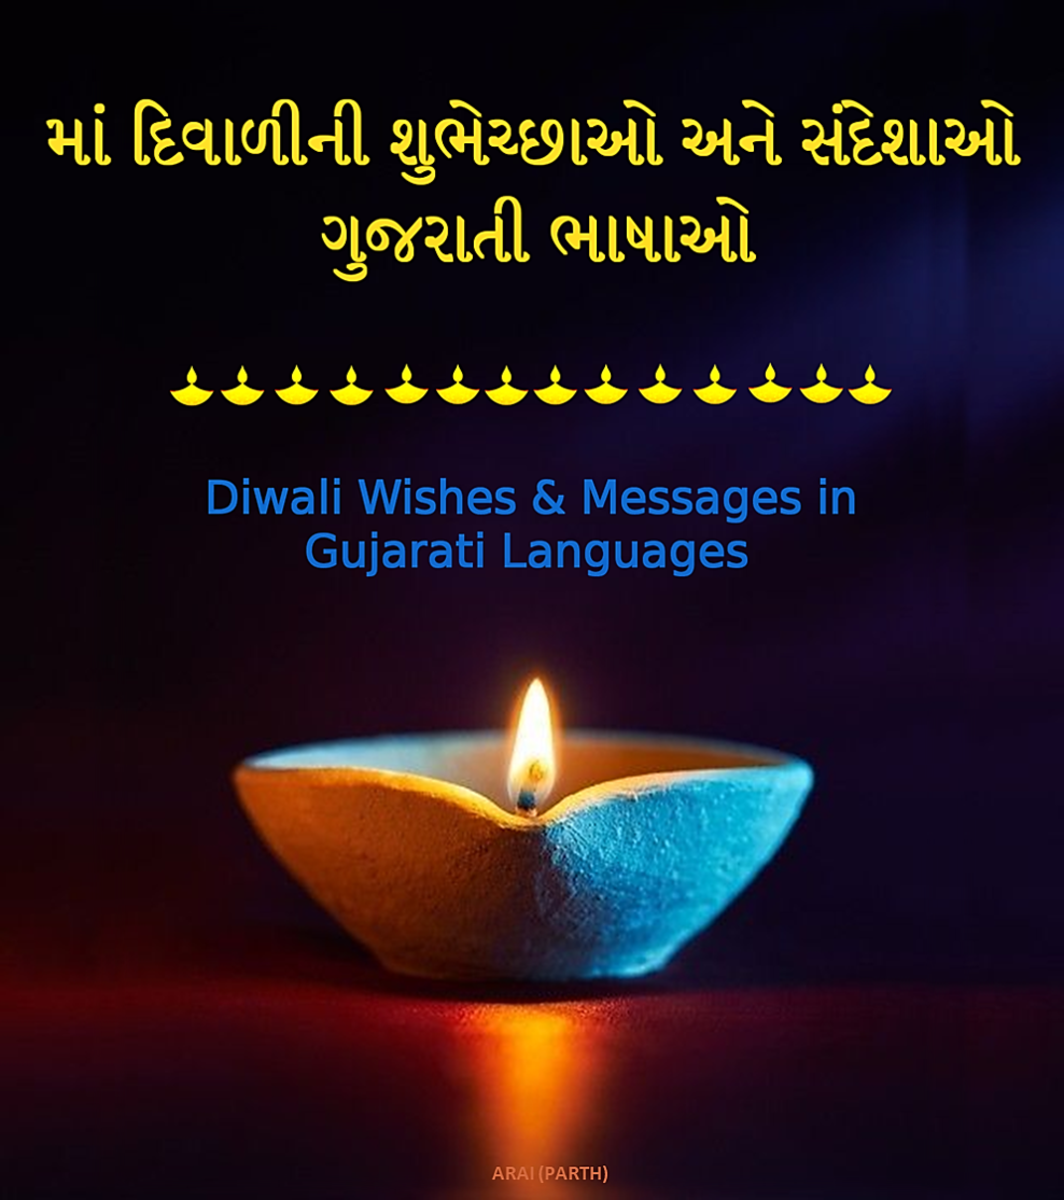 Happy Diwali Wishes and Greetings in Gujarati Languages